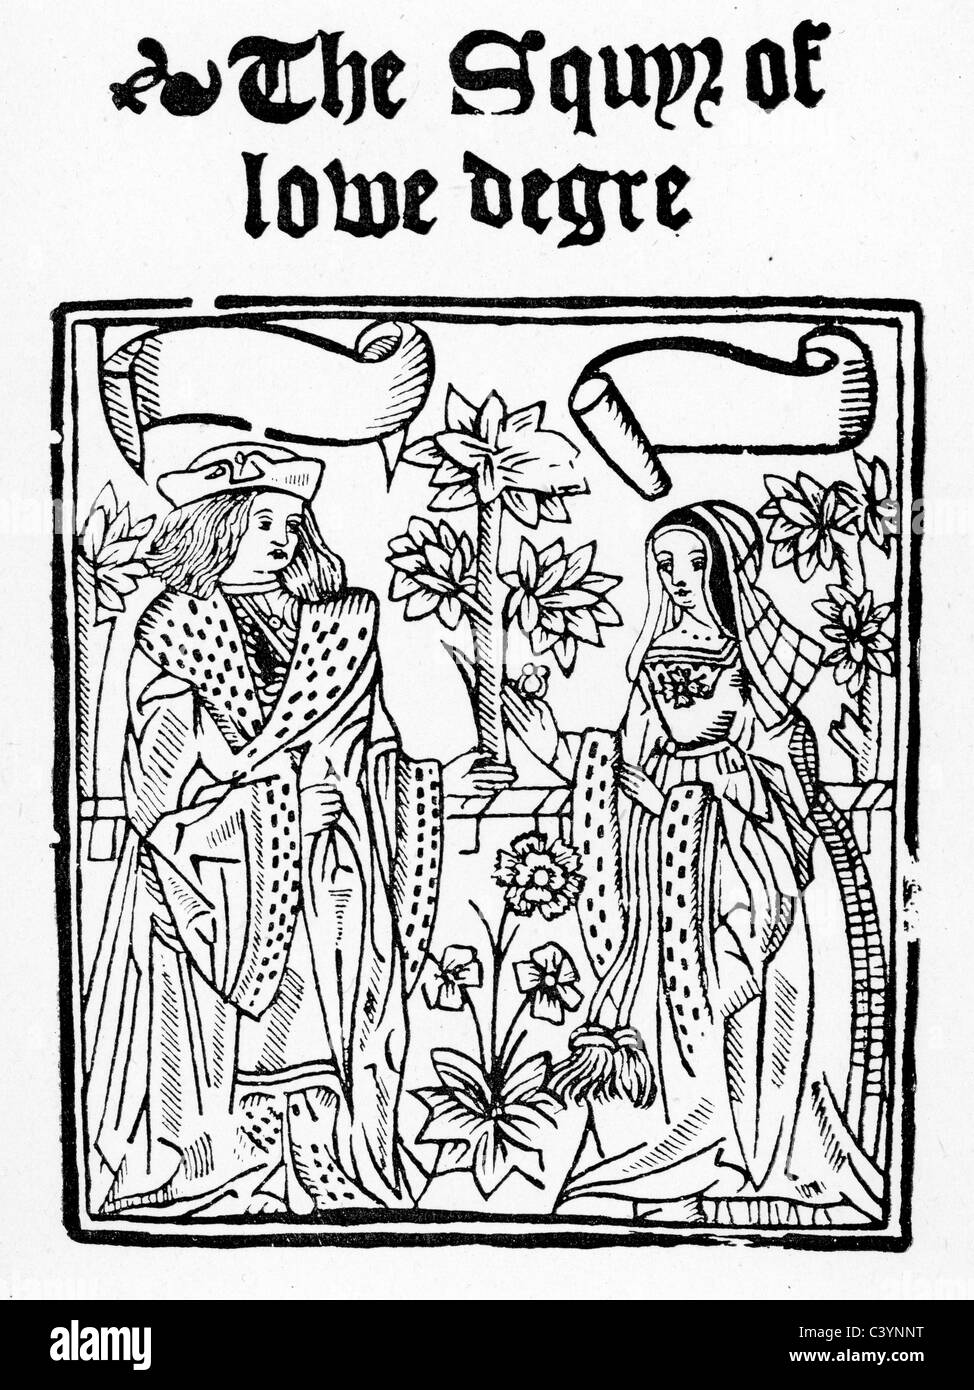 Medieval woodcut showing a scene from the The Squire of Low Degree Stock Photo